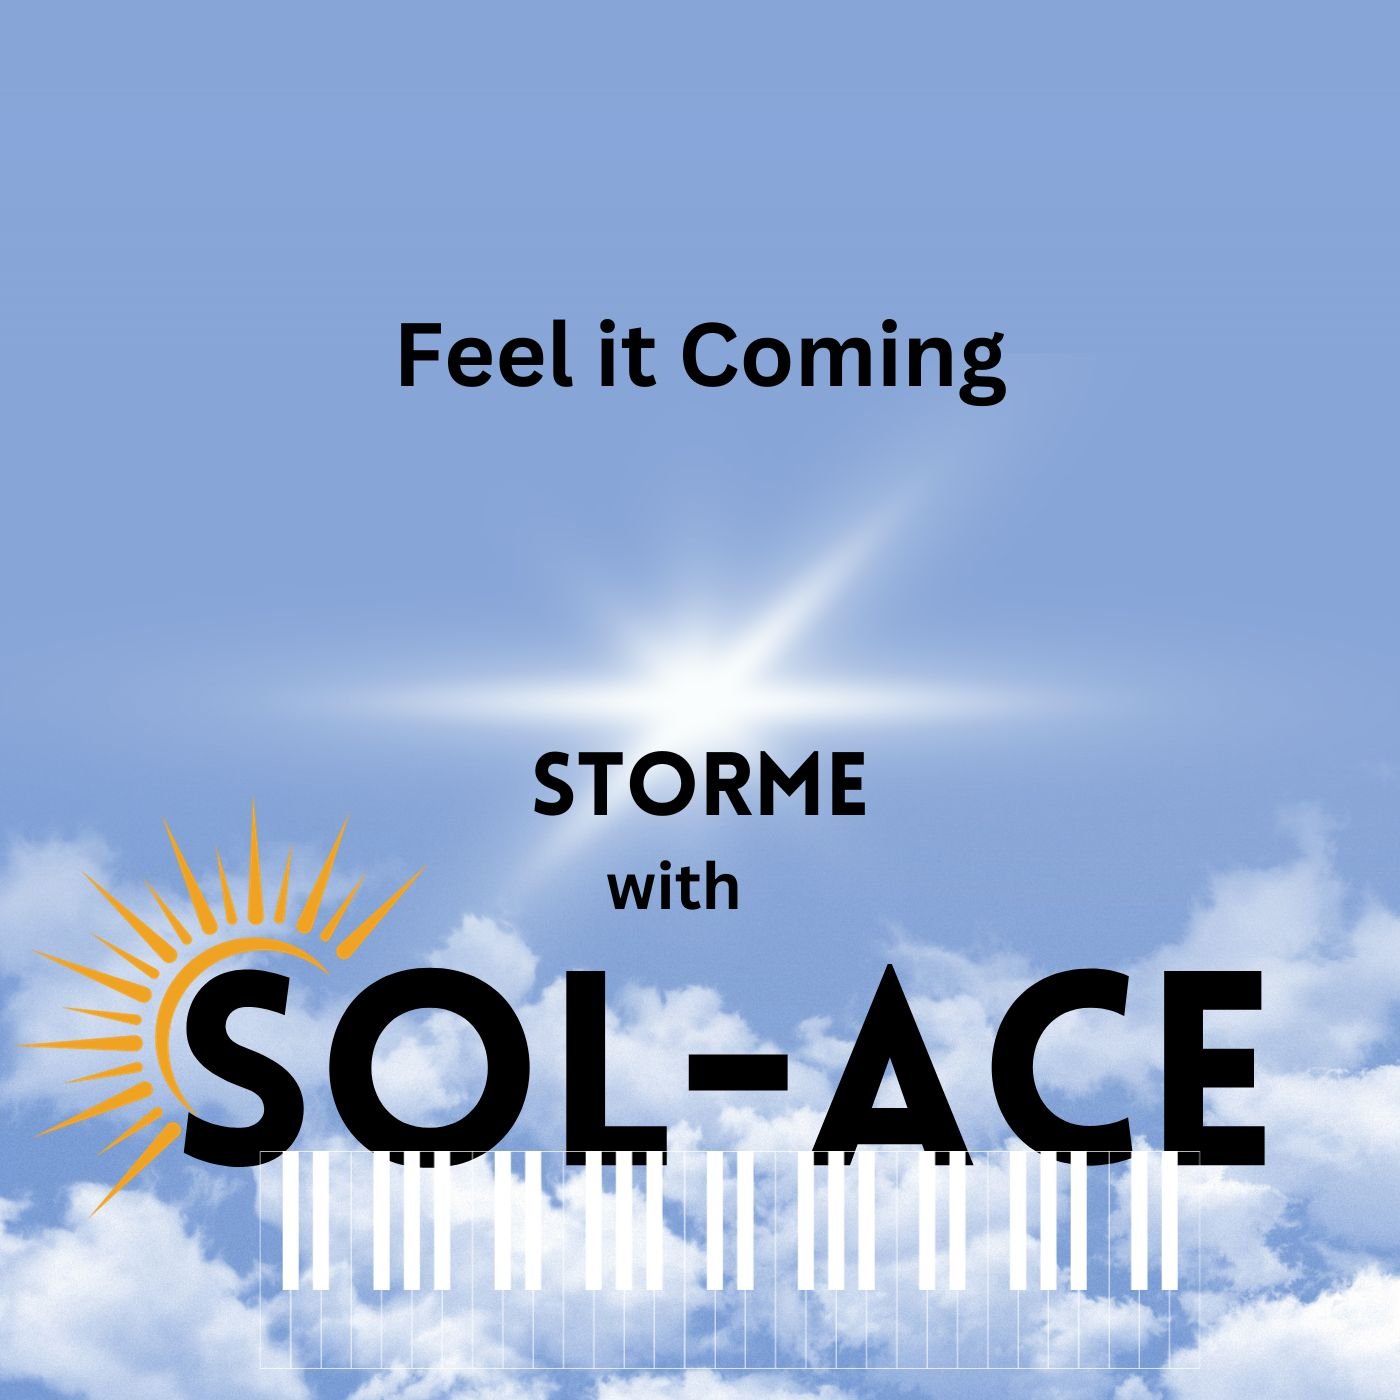 Feel it Coming by Storme with SOL-ACE